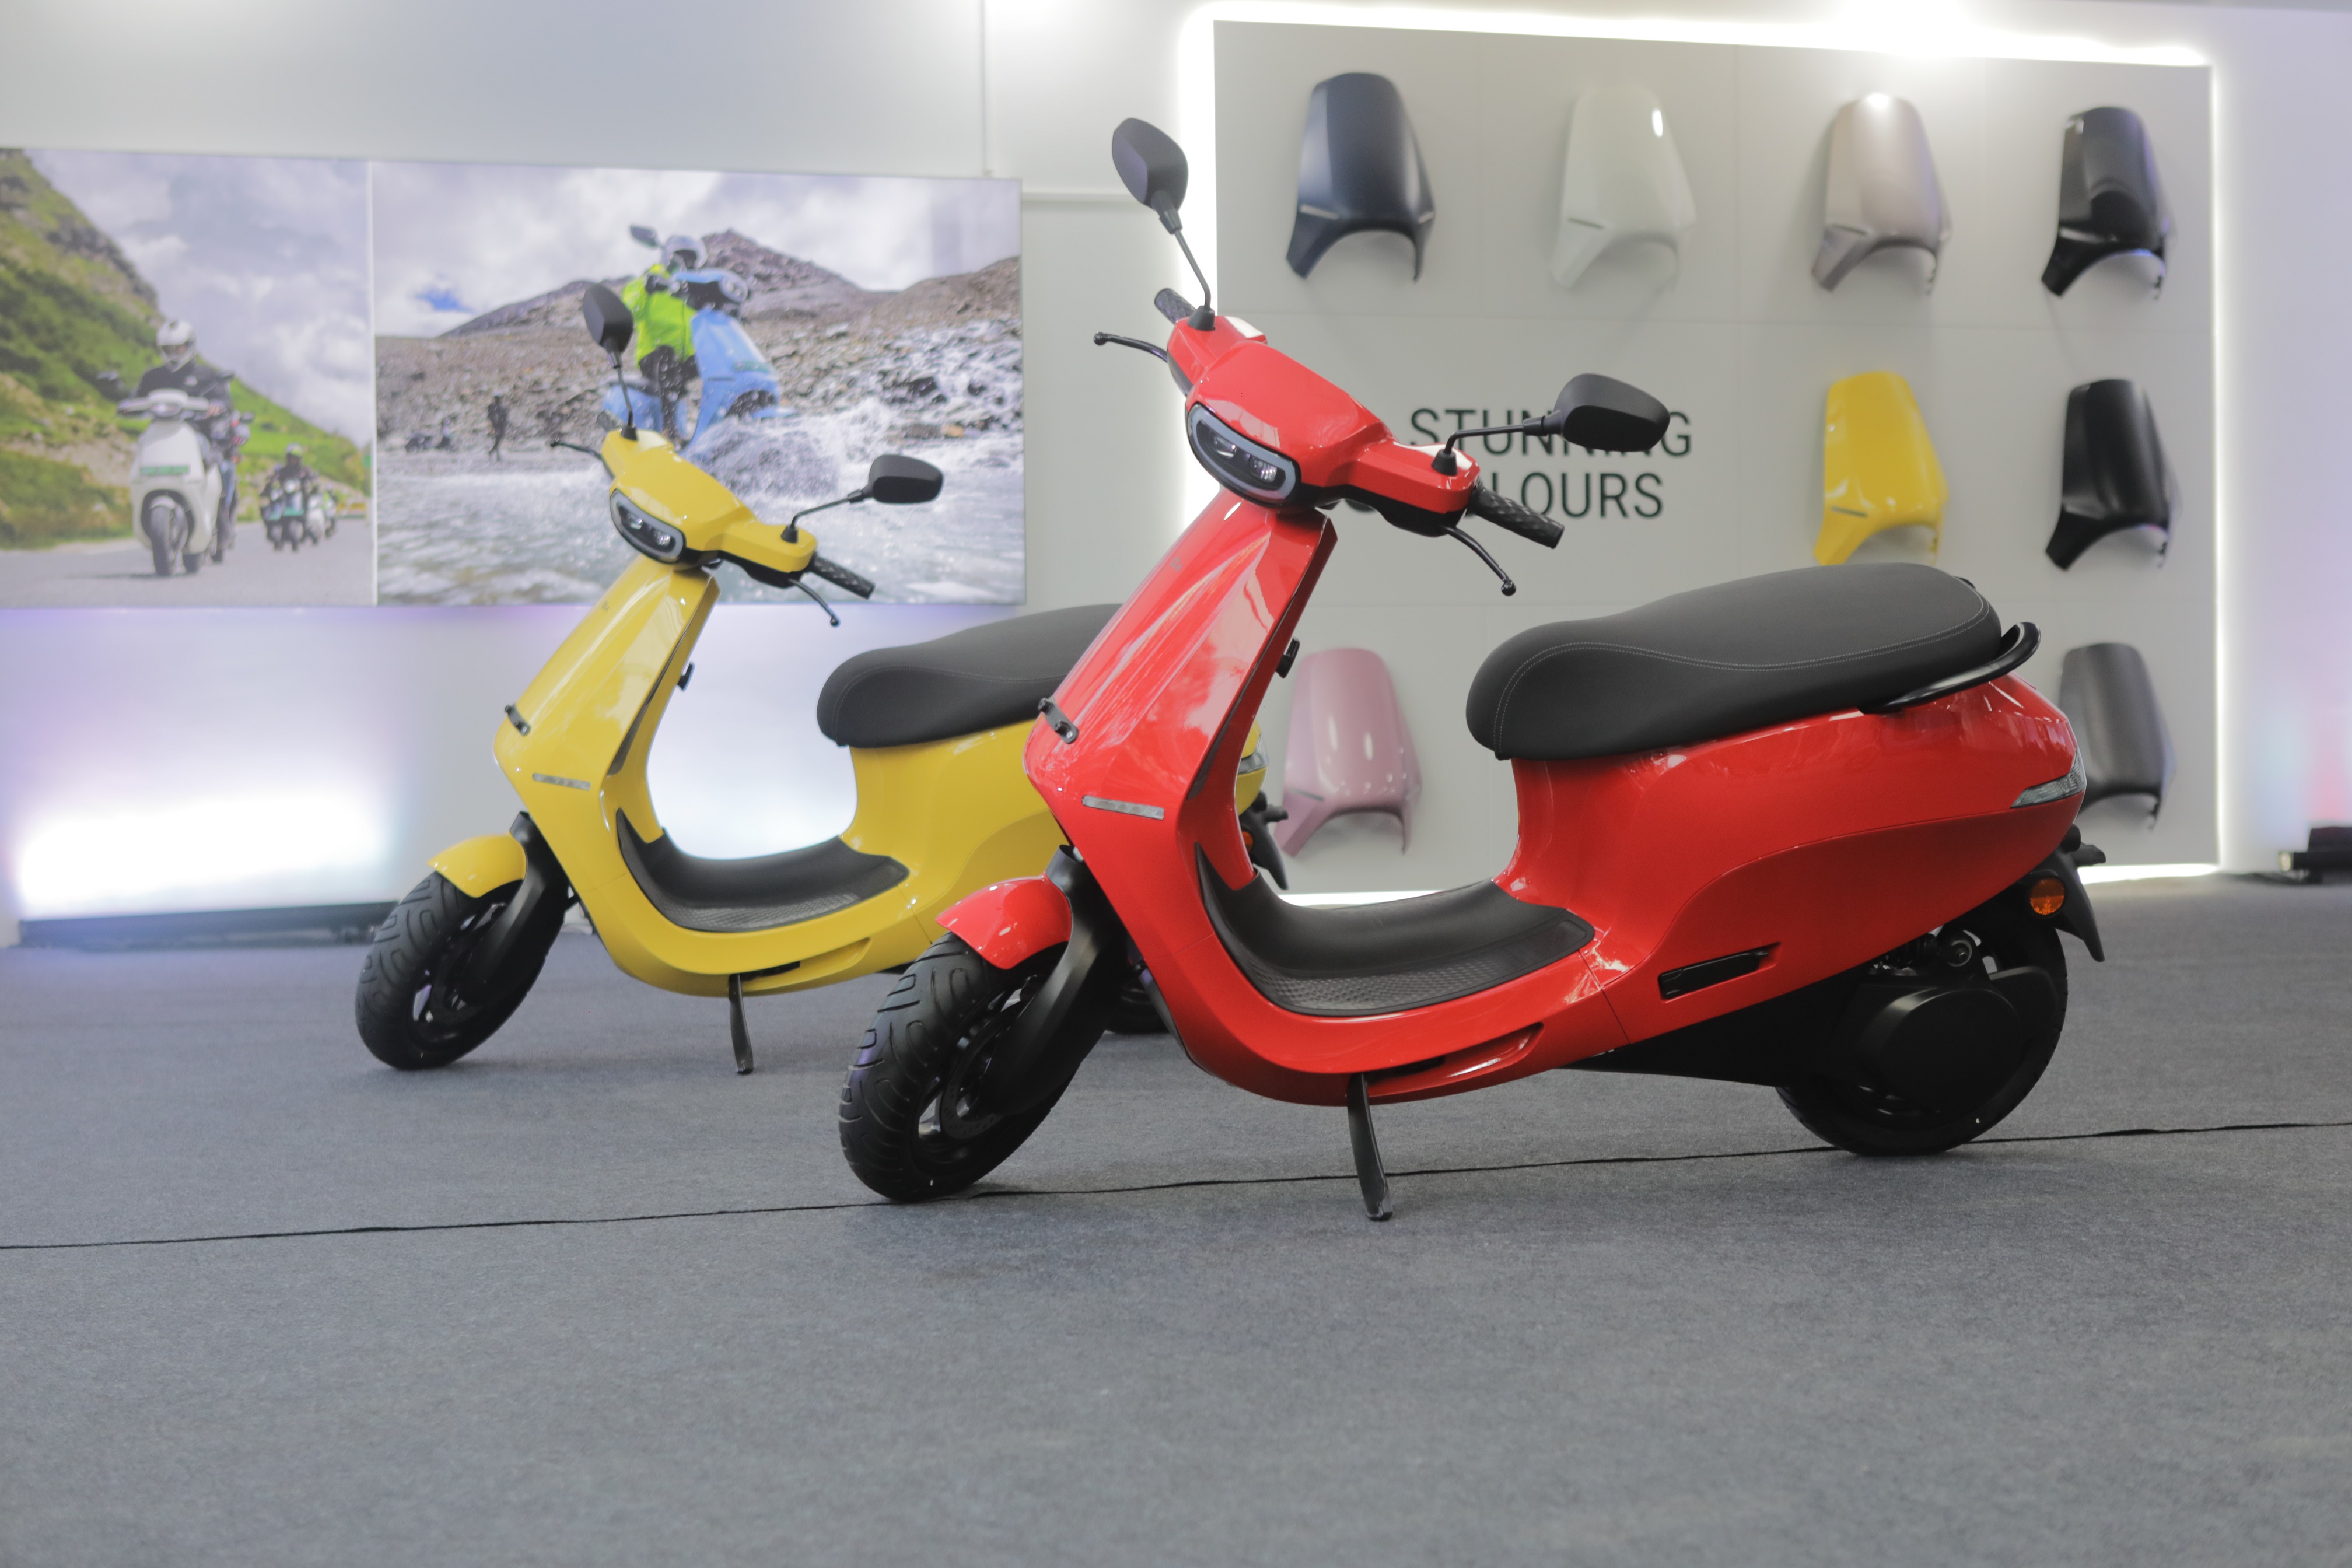 Offer not applicable to S1 Air and S1 variants of electric scooters